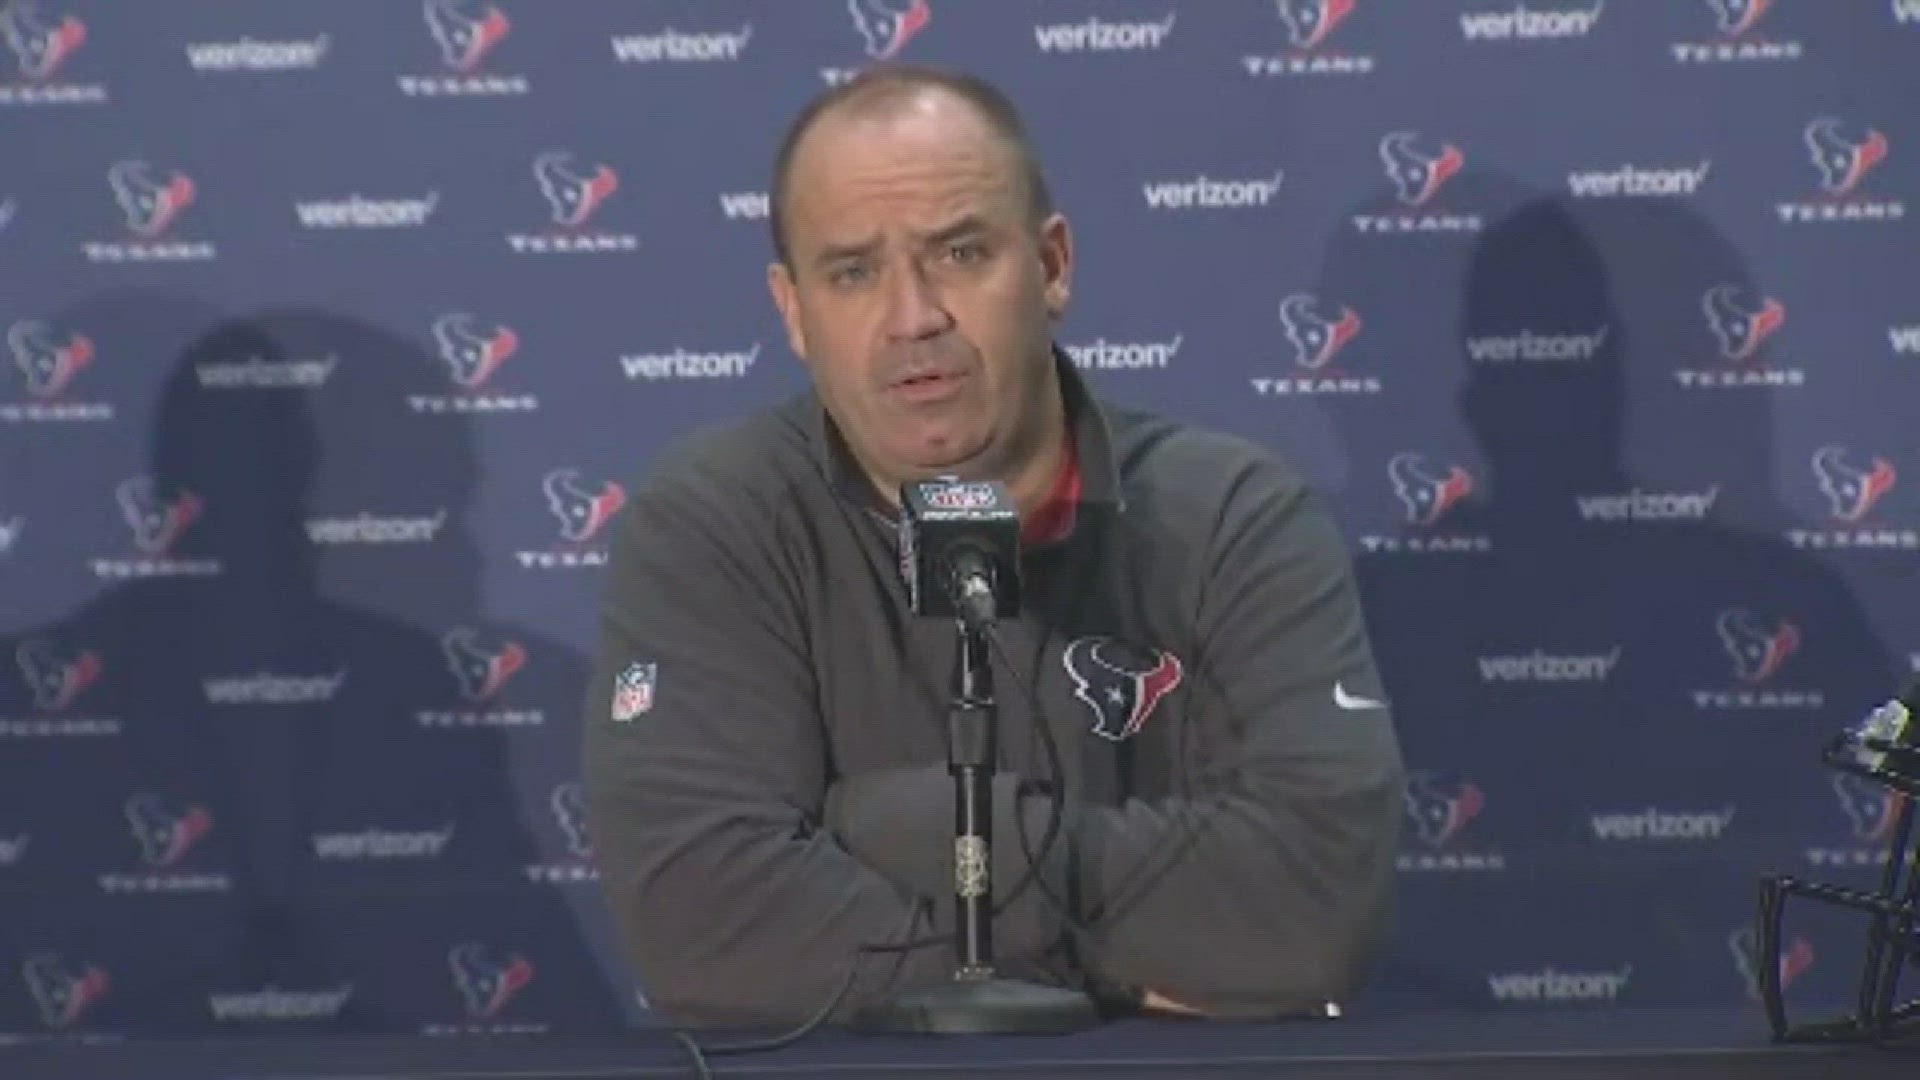 Bill O'Brien discusses the Houston Texans' first-round draft pick Will Fuller, a wide receiver from Notre Dame.